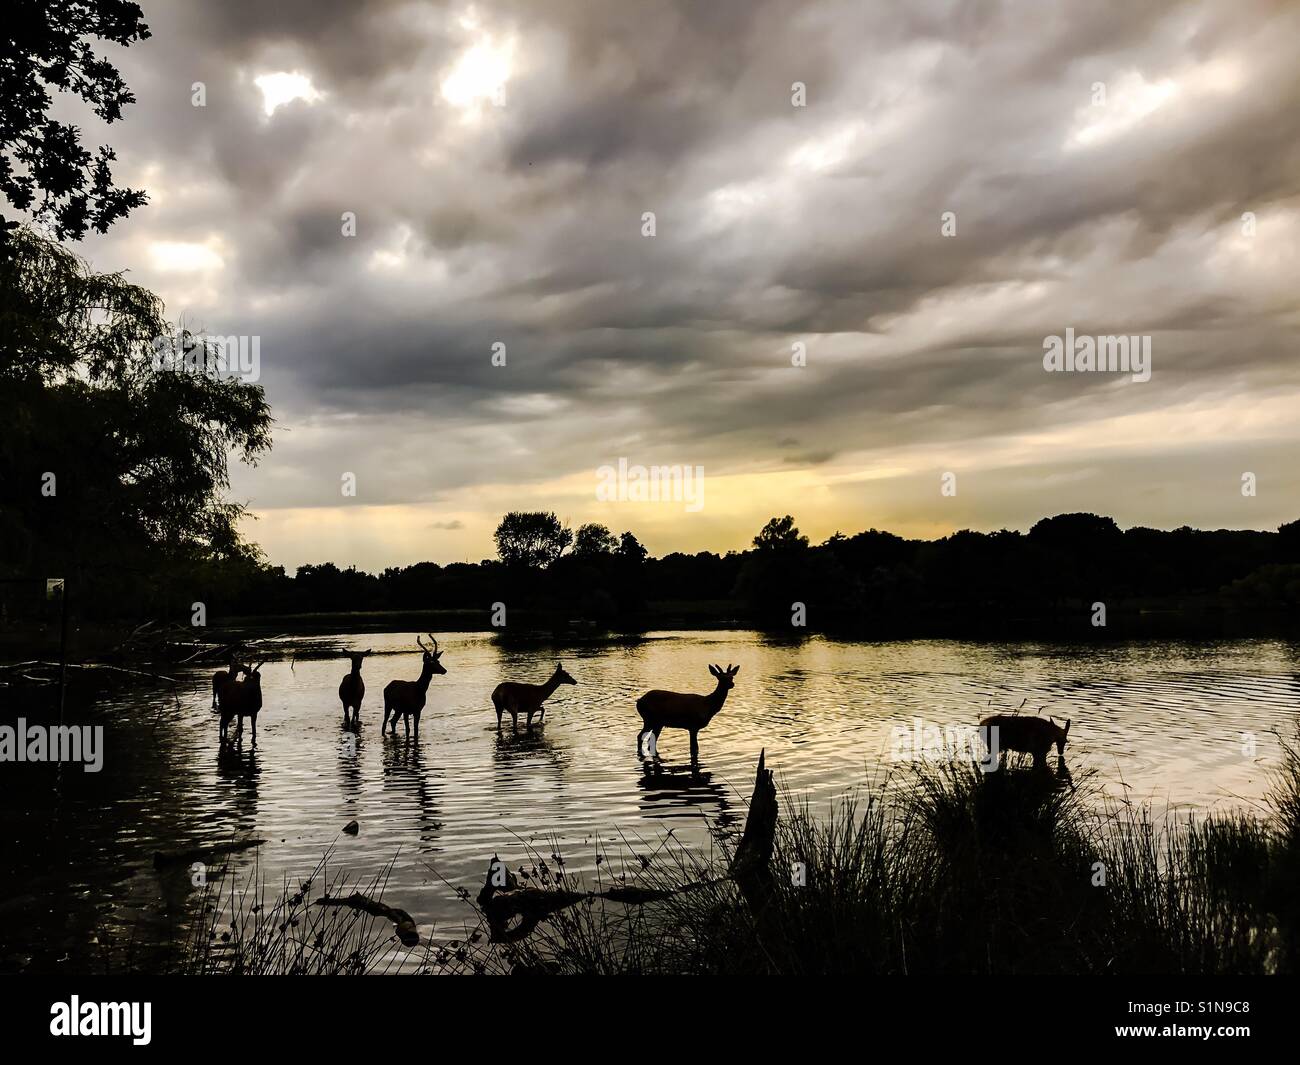 Group of deer walking across the river in the evening with a bit of sin light as a background at Richmond park, London, England. Stock Photo